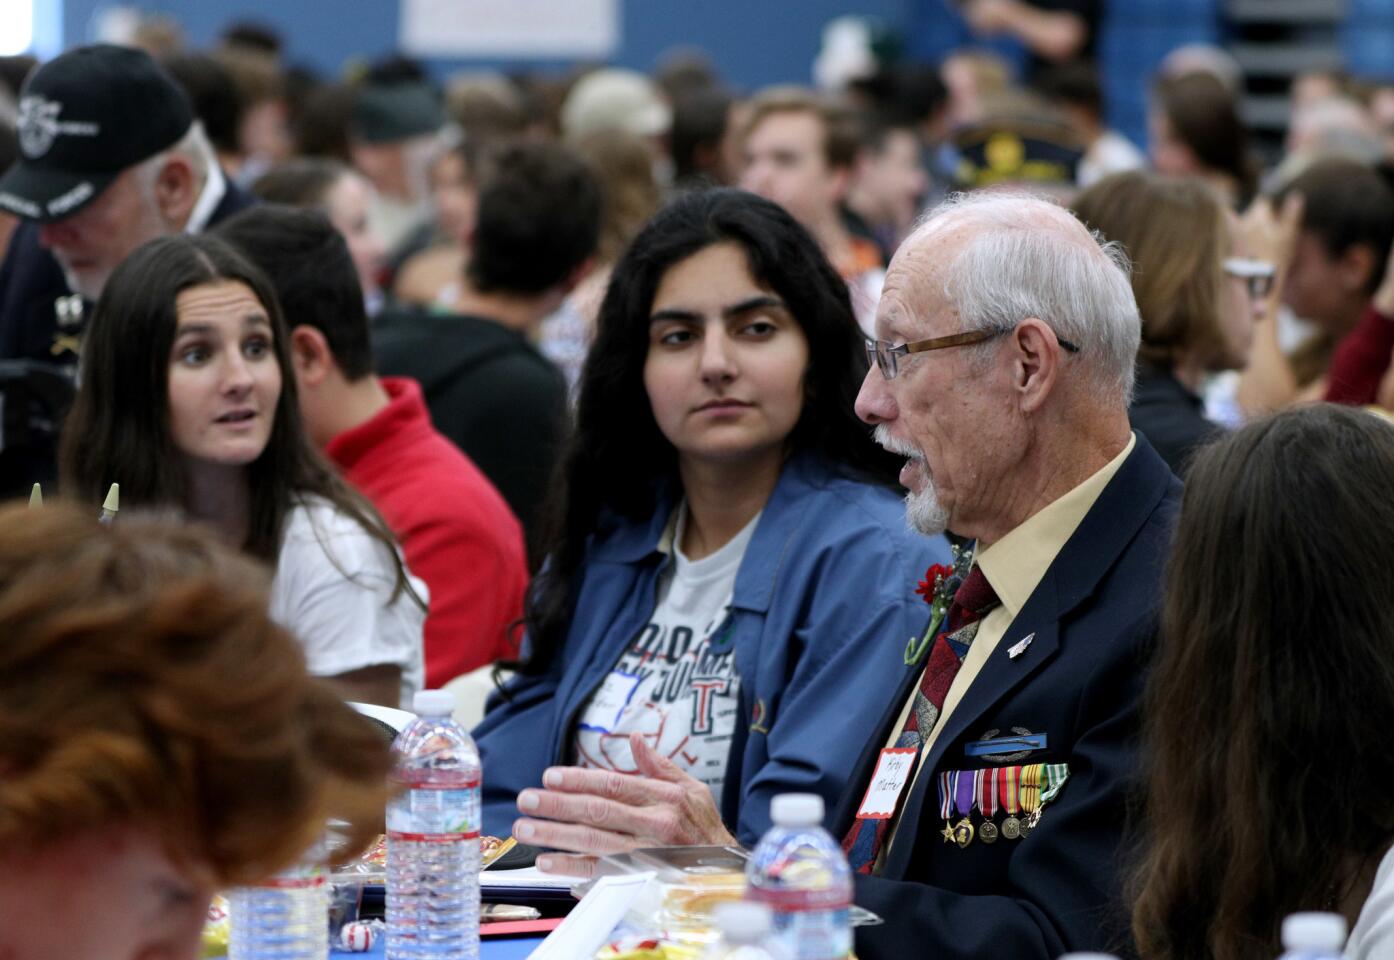 Sophomores Ryann McTague, left, and Niaz Namdar listen to Army veteran Kirby Matter, 75, of Fountain Valley at the Corona del Mar High School "Living History" luncheon on Thursday. Military veterans visited to share their experiences with students. Matter served during the Vietnam War.